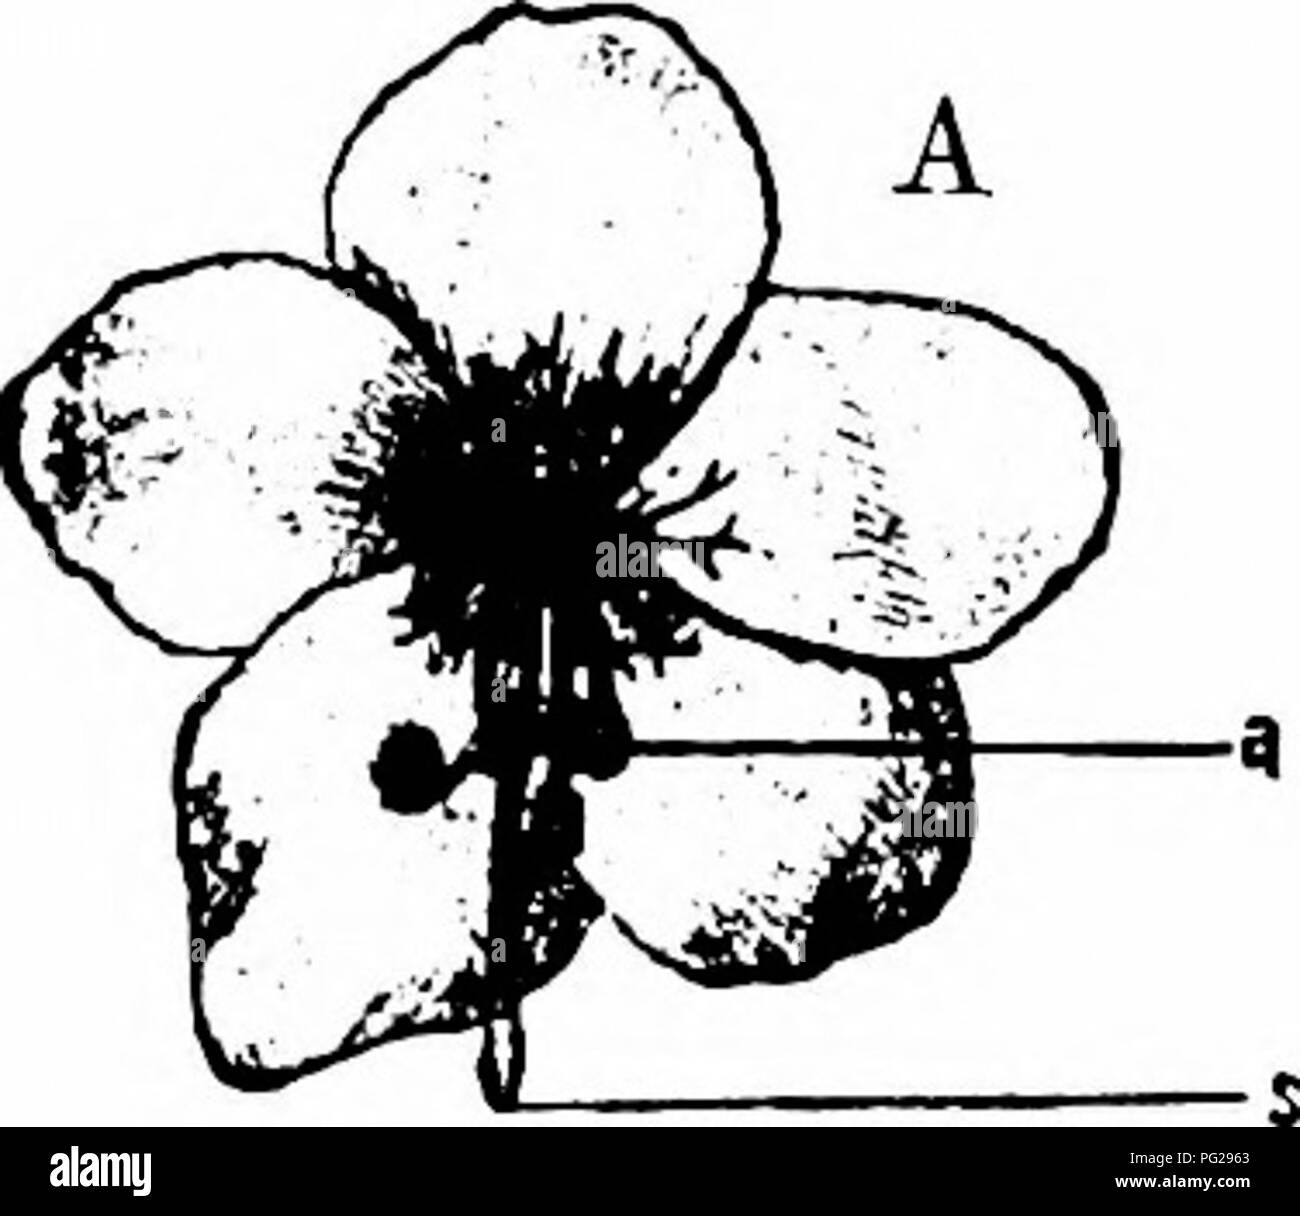 . Handbook of flower pollination : based upon Hermann Mu?ller's work 'The fertilisation of flowers by insects' . Fertilization of plants. no ANGIOSPERMAE—DICOTYLEDONES 584. Hockinia Gardn. 1922. H. montana Gardn. (Gilg, Ber. D. bot. Ges., Berlin, xiii, 1895.)—Gilg describes the flowers of this species as pleomorphous. Knoblauch (op. cit., xiii, 1895) refers all Gilg's forms to two only, so that it is only a case of dimorphism. 585. Halenia Borckh. 1923. H. Rothrockii A. Gray. (Gilg, op. cit.)—Gilg states that this species bears cleistogamous flowers of two kinds, in addition to the chasmogamou Stock Photo